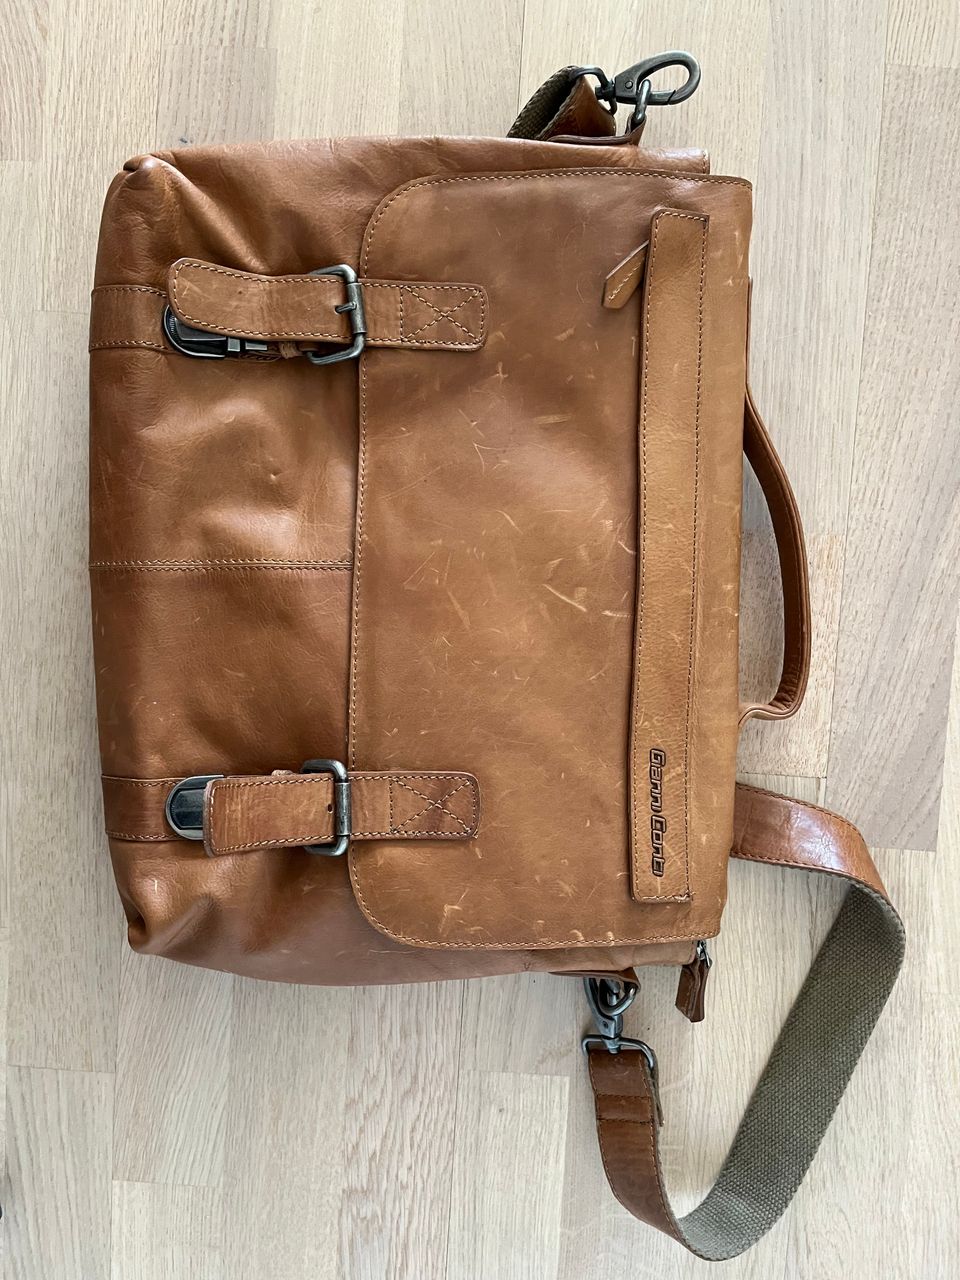 BRAND NEW ! Pure leather hand made bag from Italy